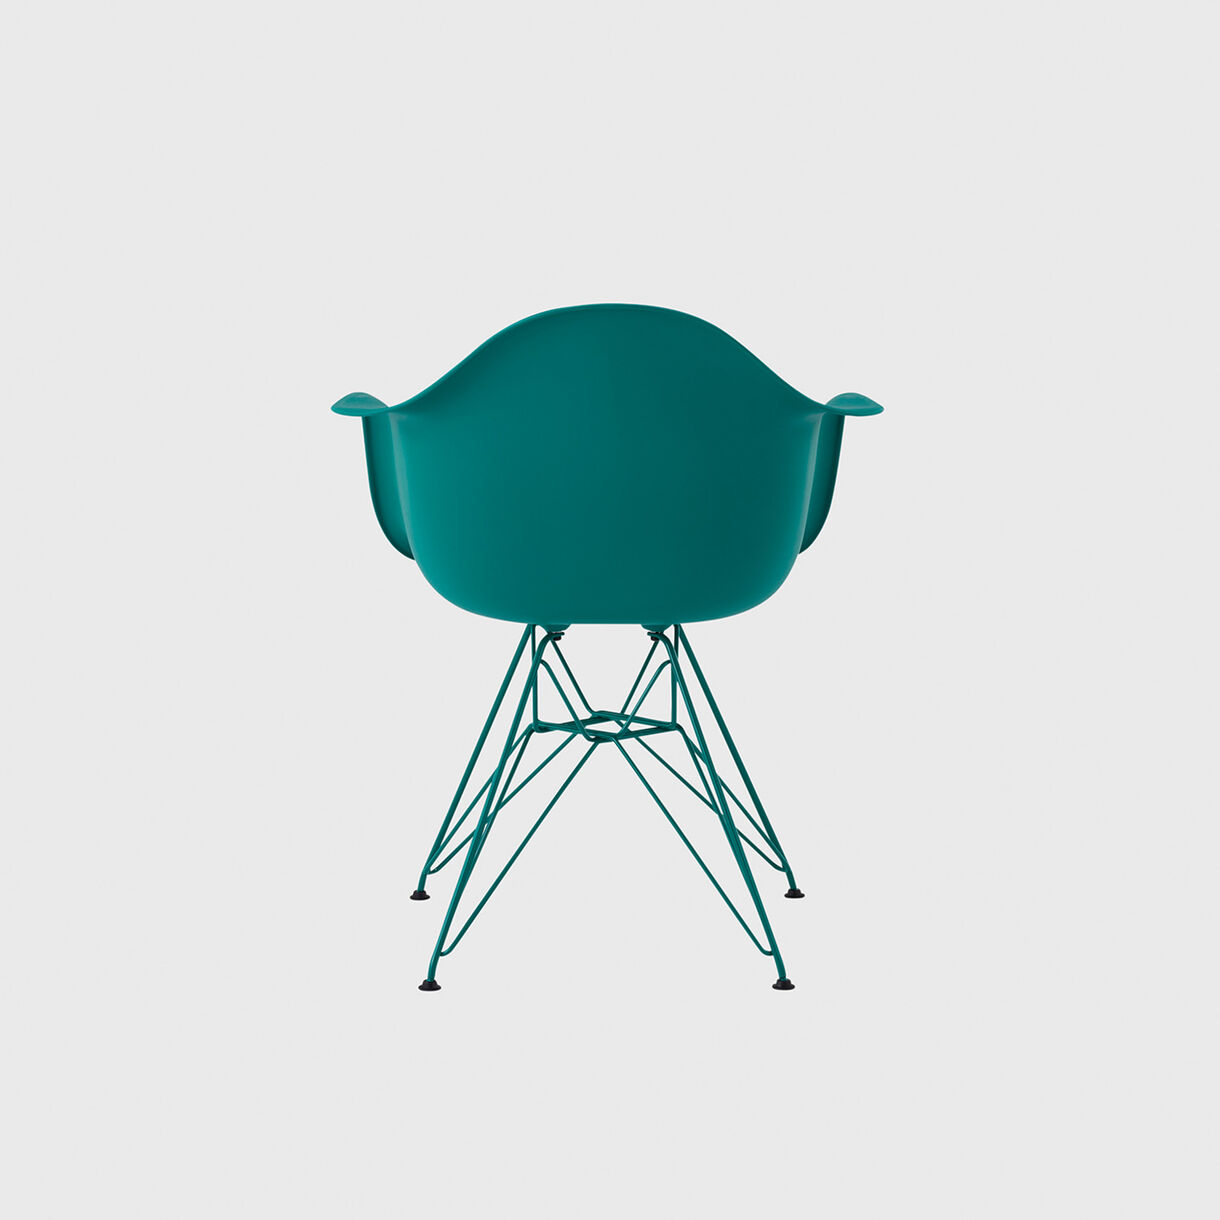 Eames Moulded Plastic Armchair, Wire Base, Mint Green